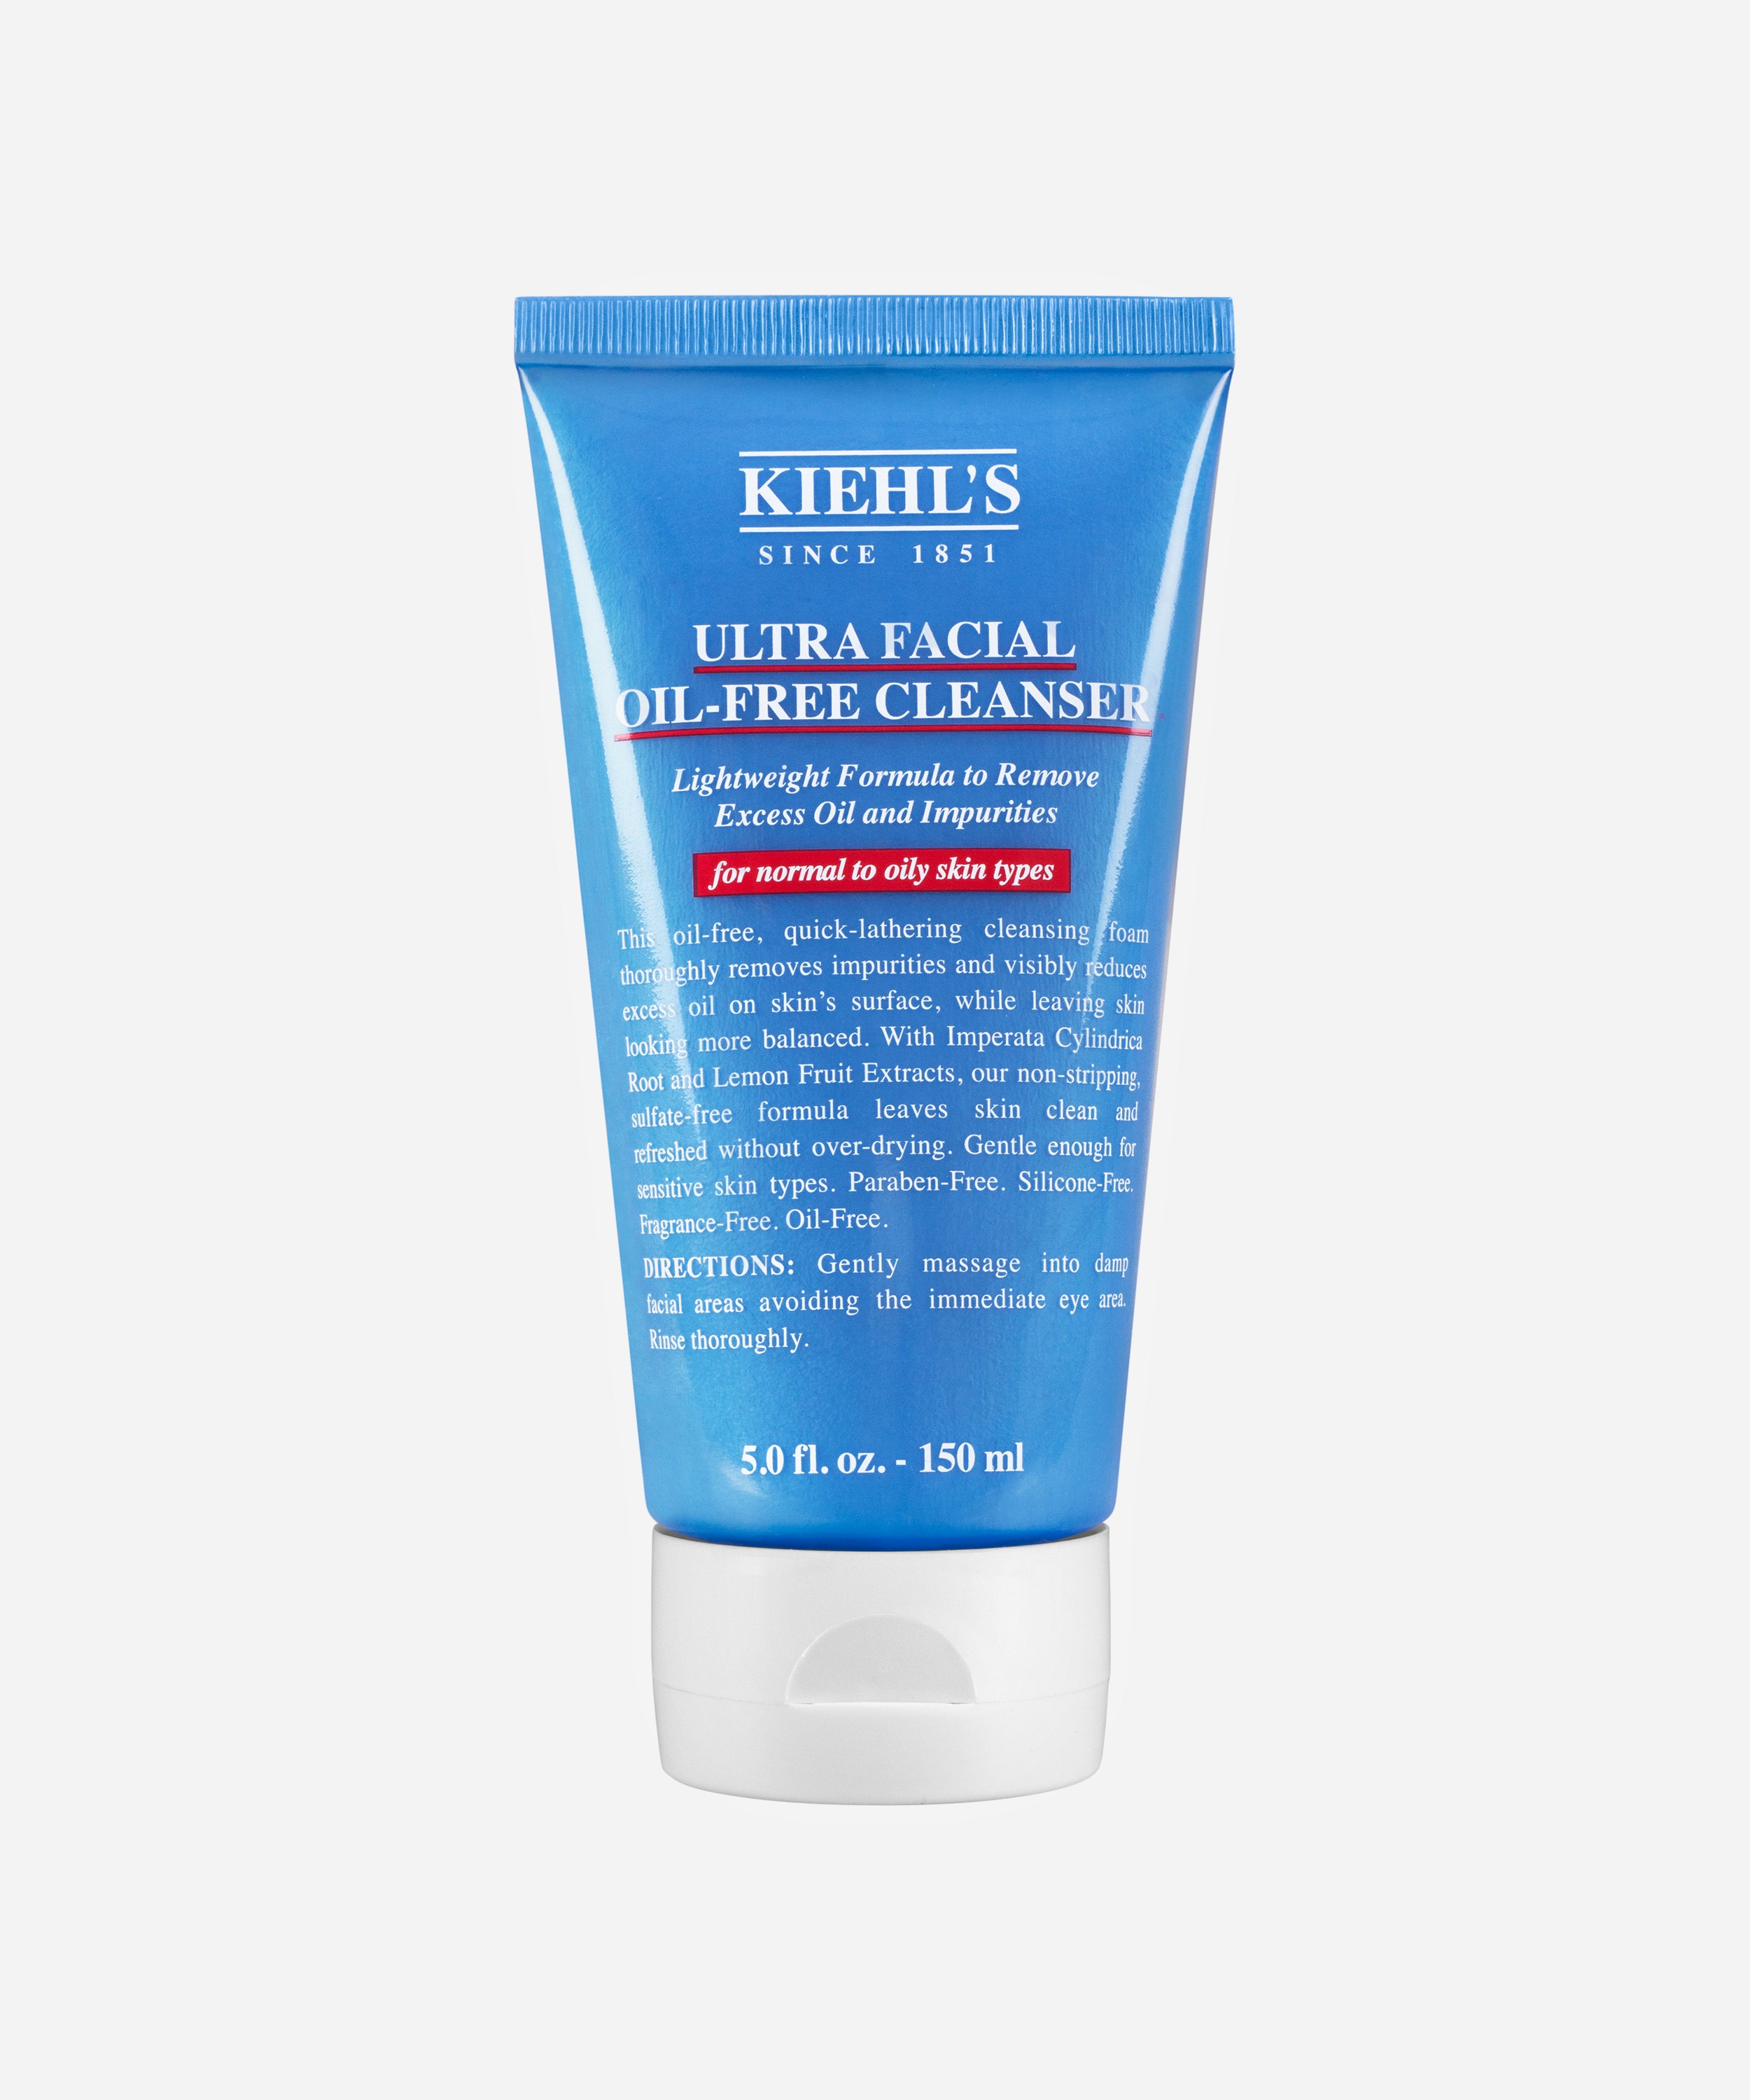 Kiehl's - Ultra Facial Oil-Free Cleanser